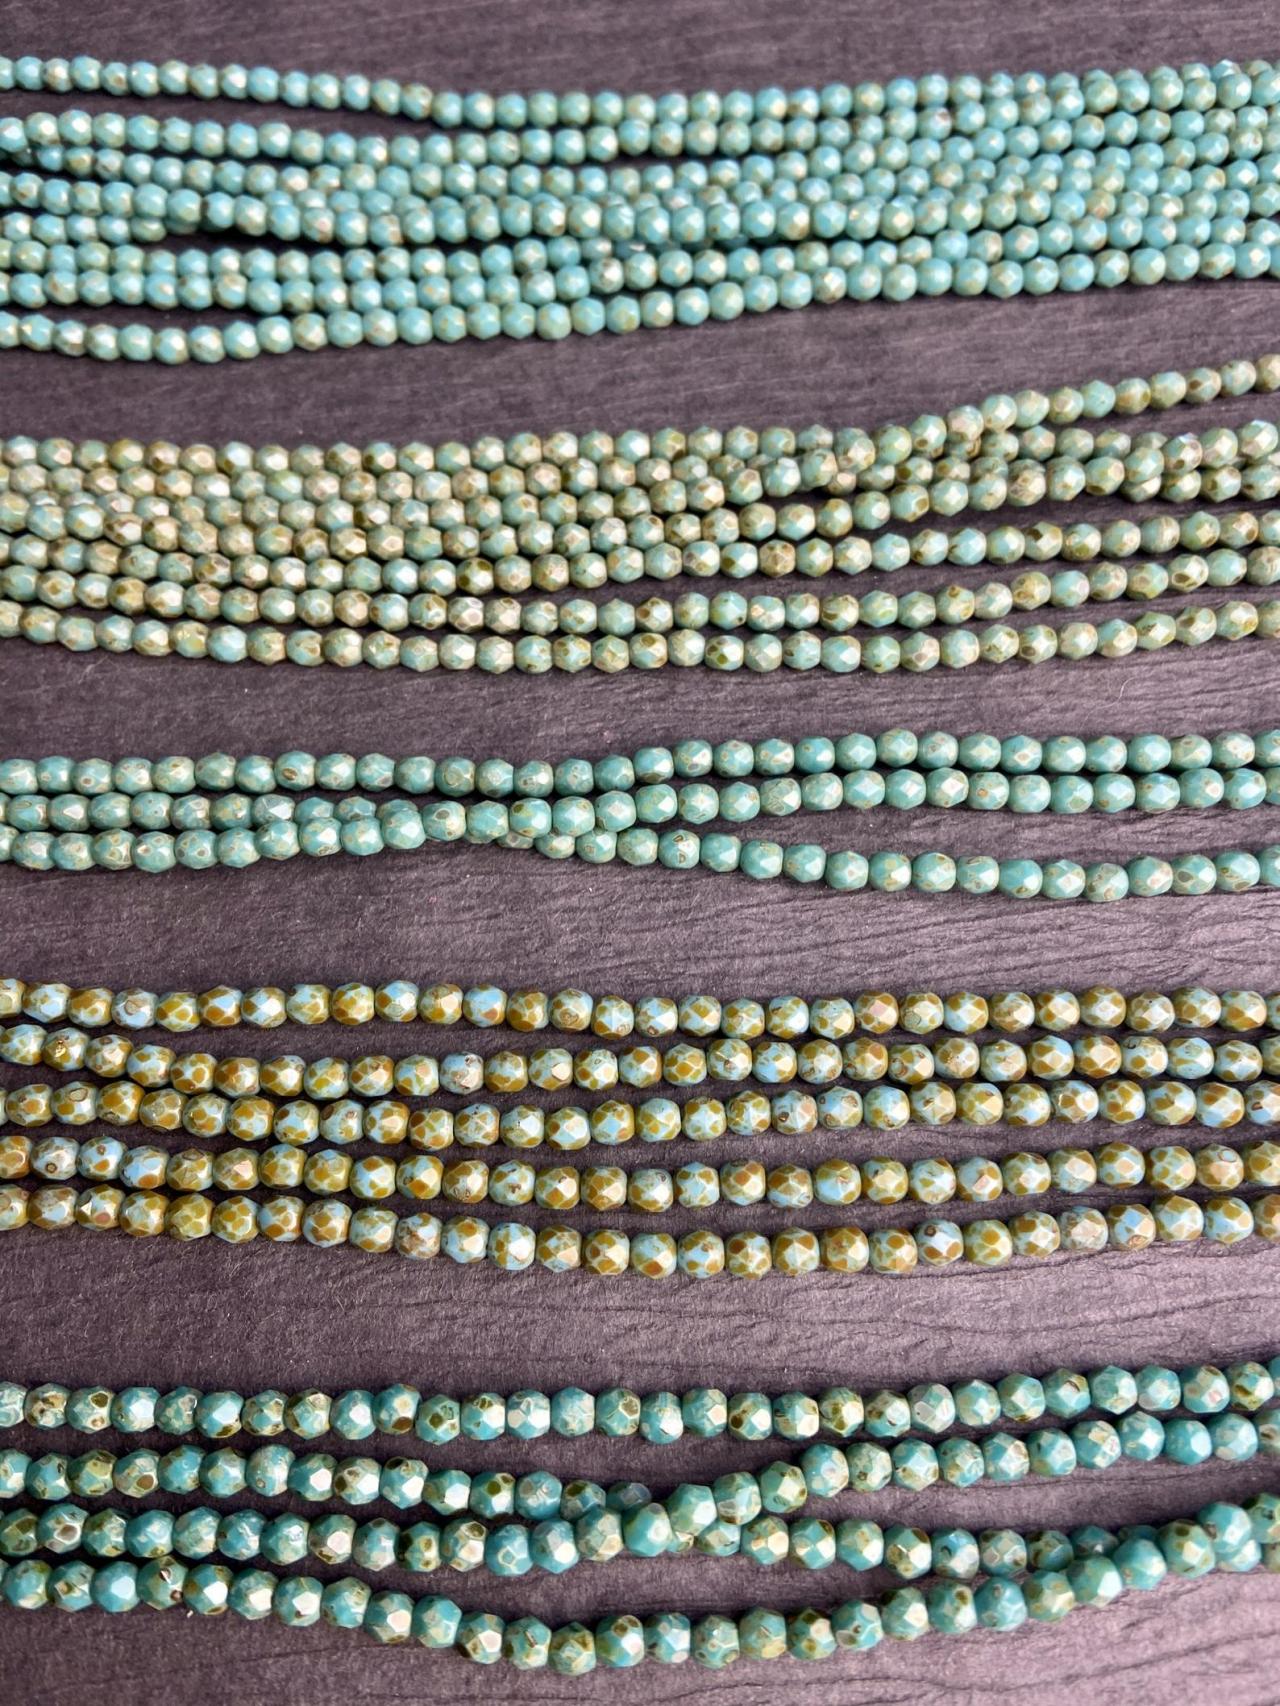 Strand of 50 4mm Czech Glass Fire Polished Faceted Round Picasso Turquoise Small Beads Loom